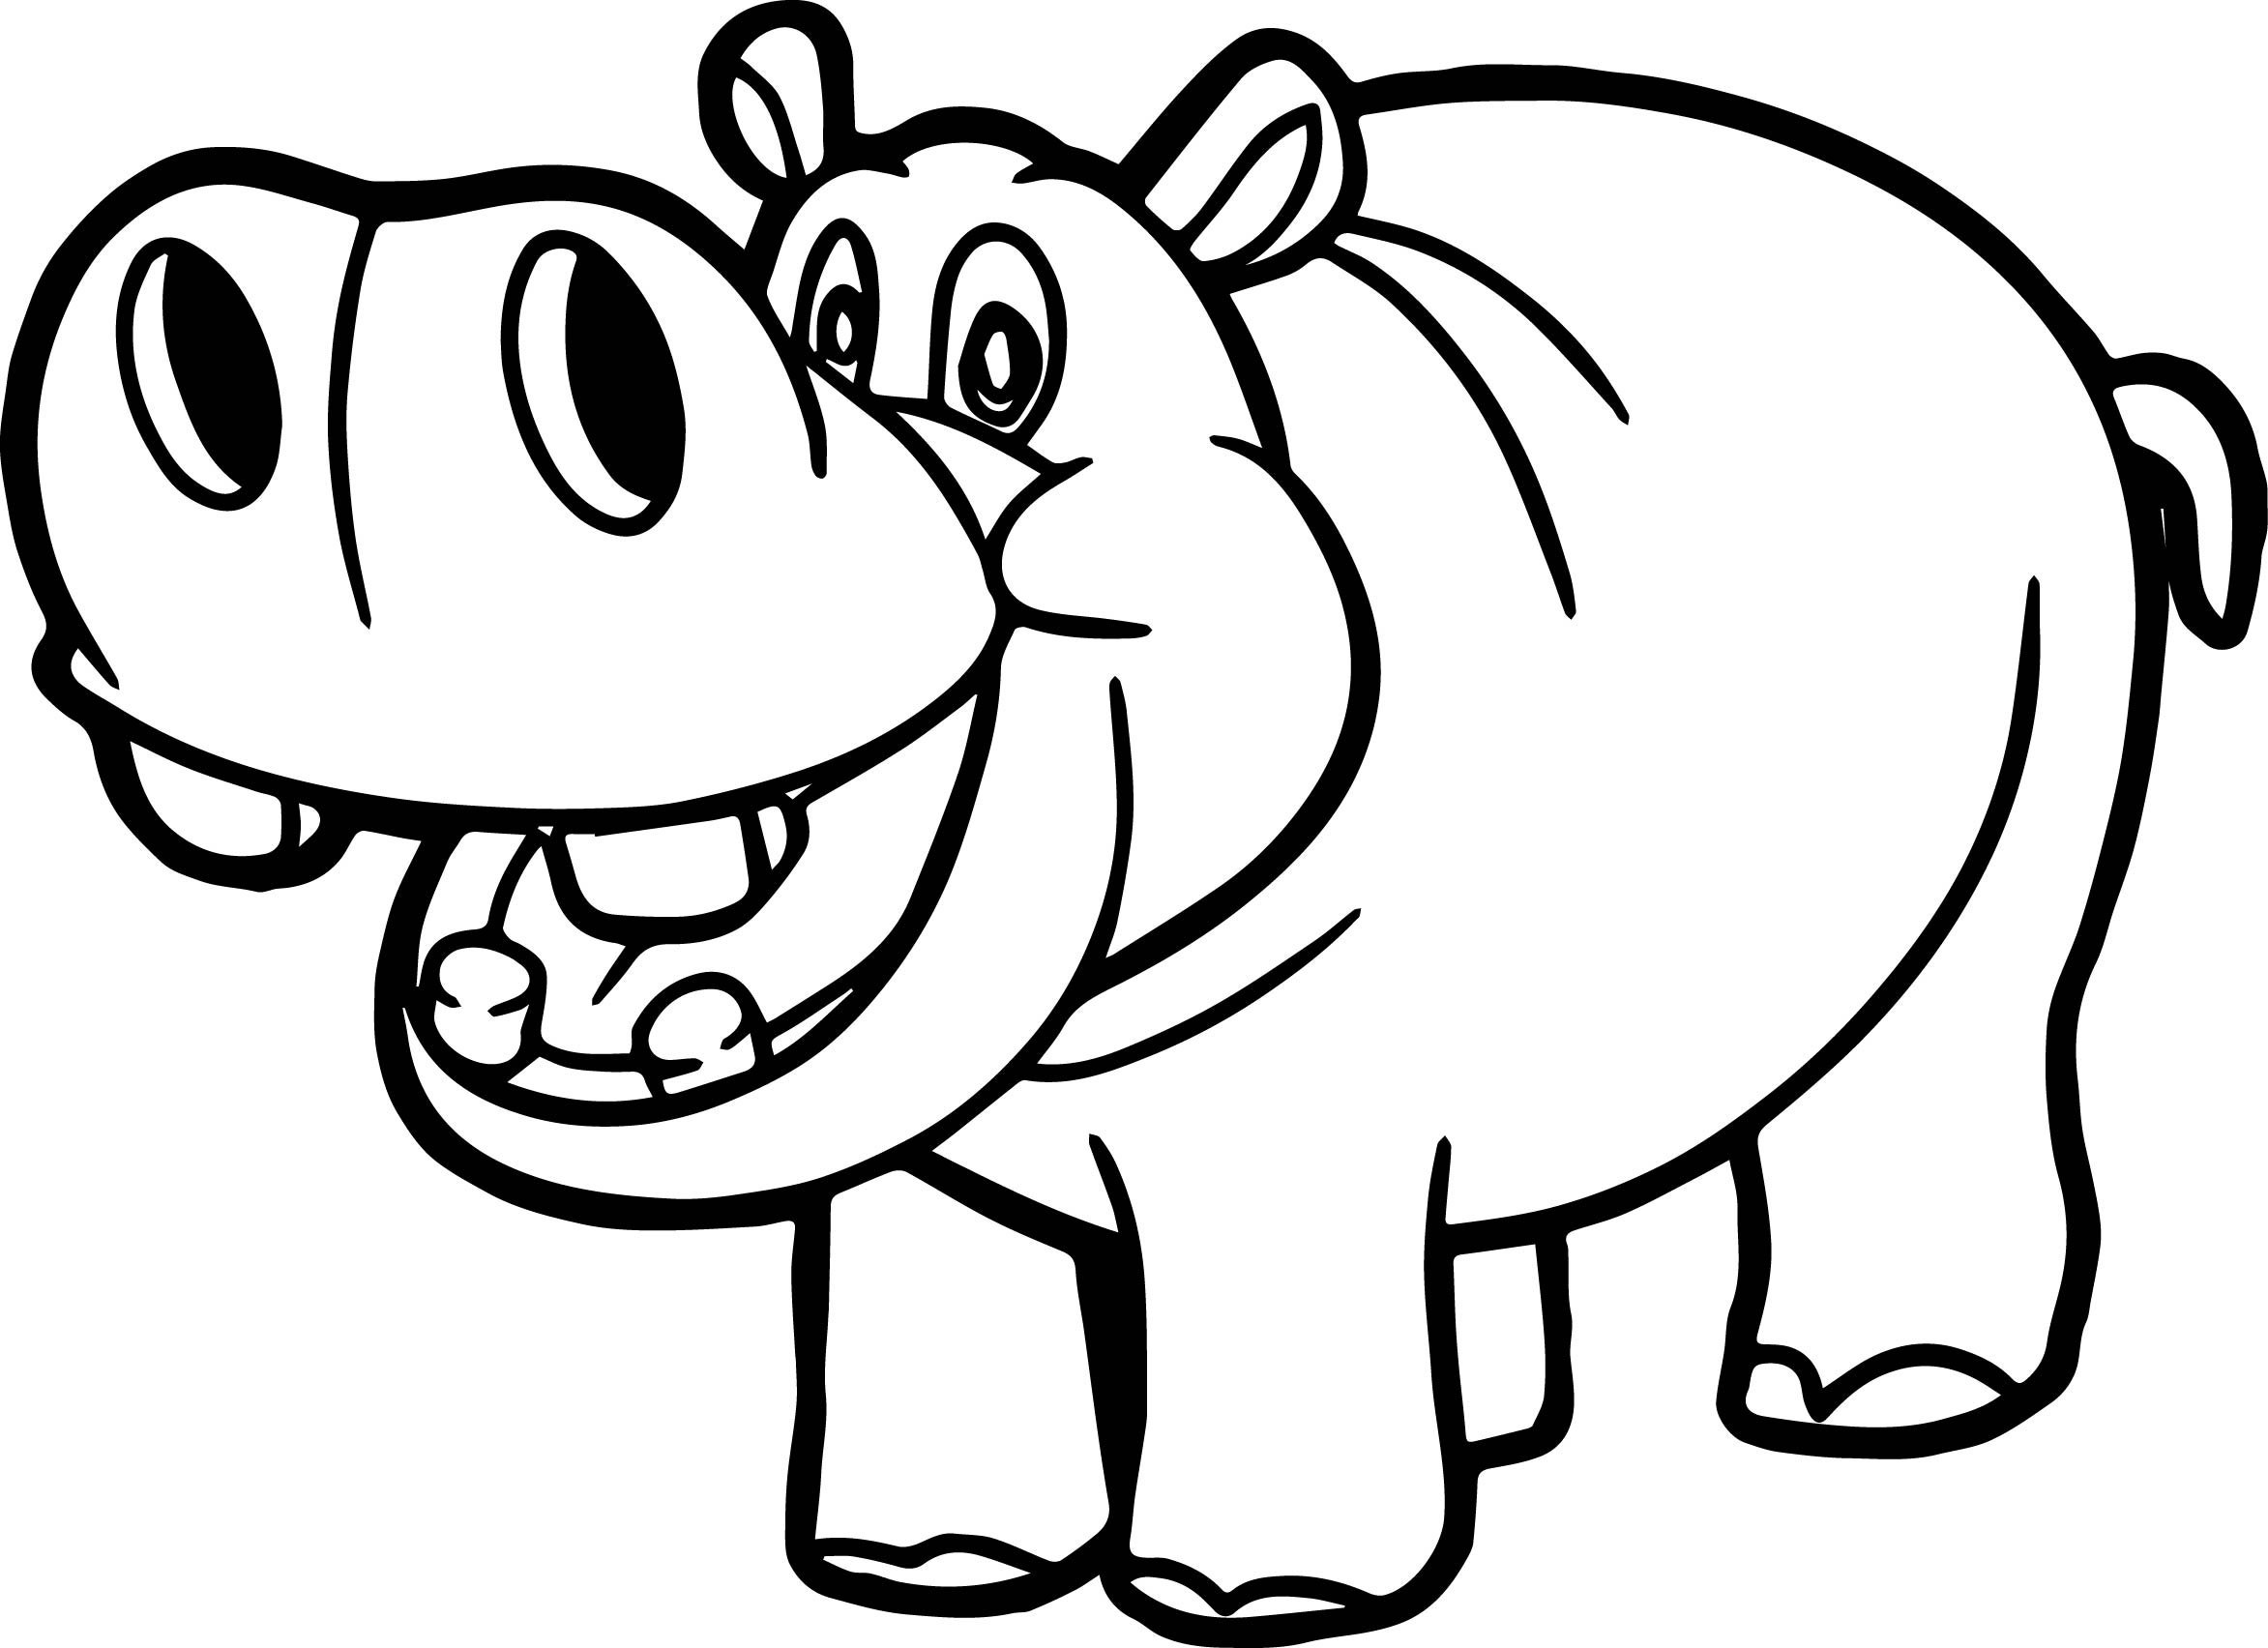 Funny Hippo Smiling Coloring Page Free Printable Coloring Pages For Kids